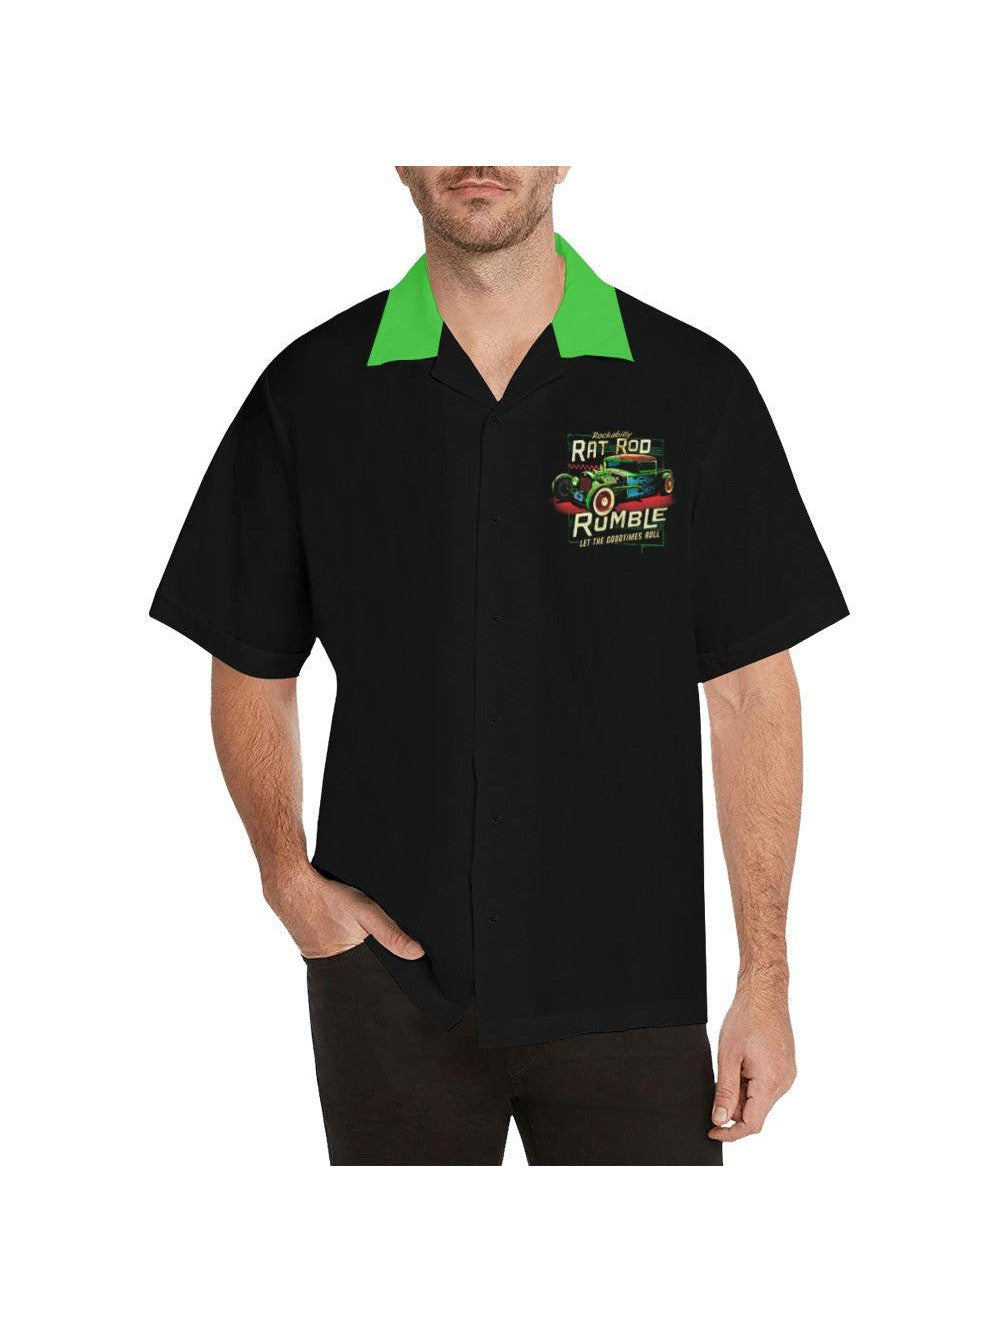 Retro Bowling Shirts | Buy Mens Vintage Button Up Shirts Online Page 4